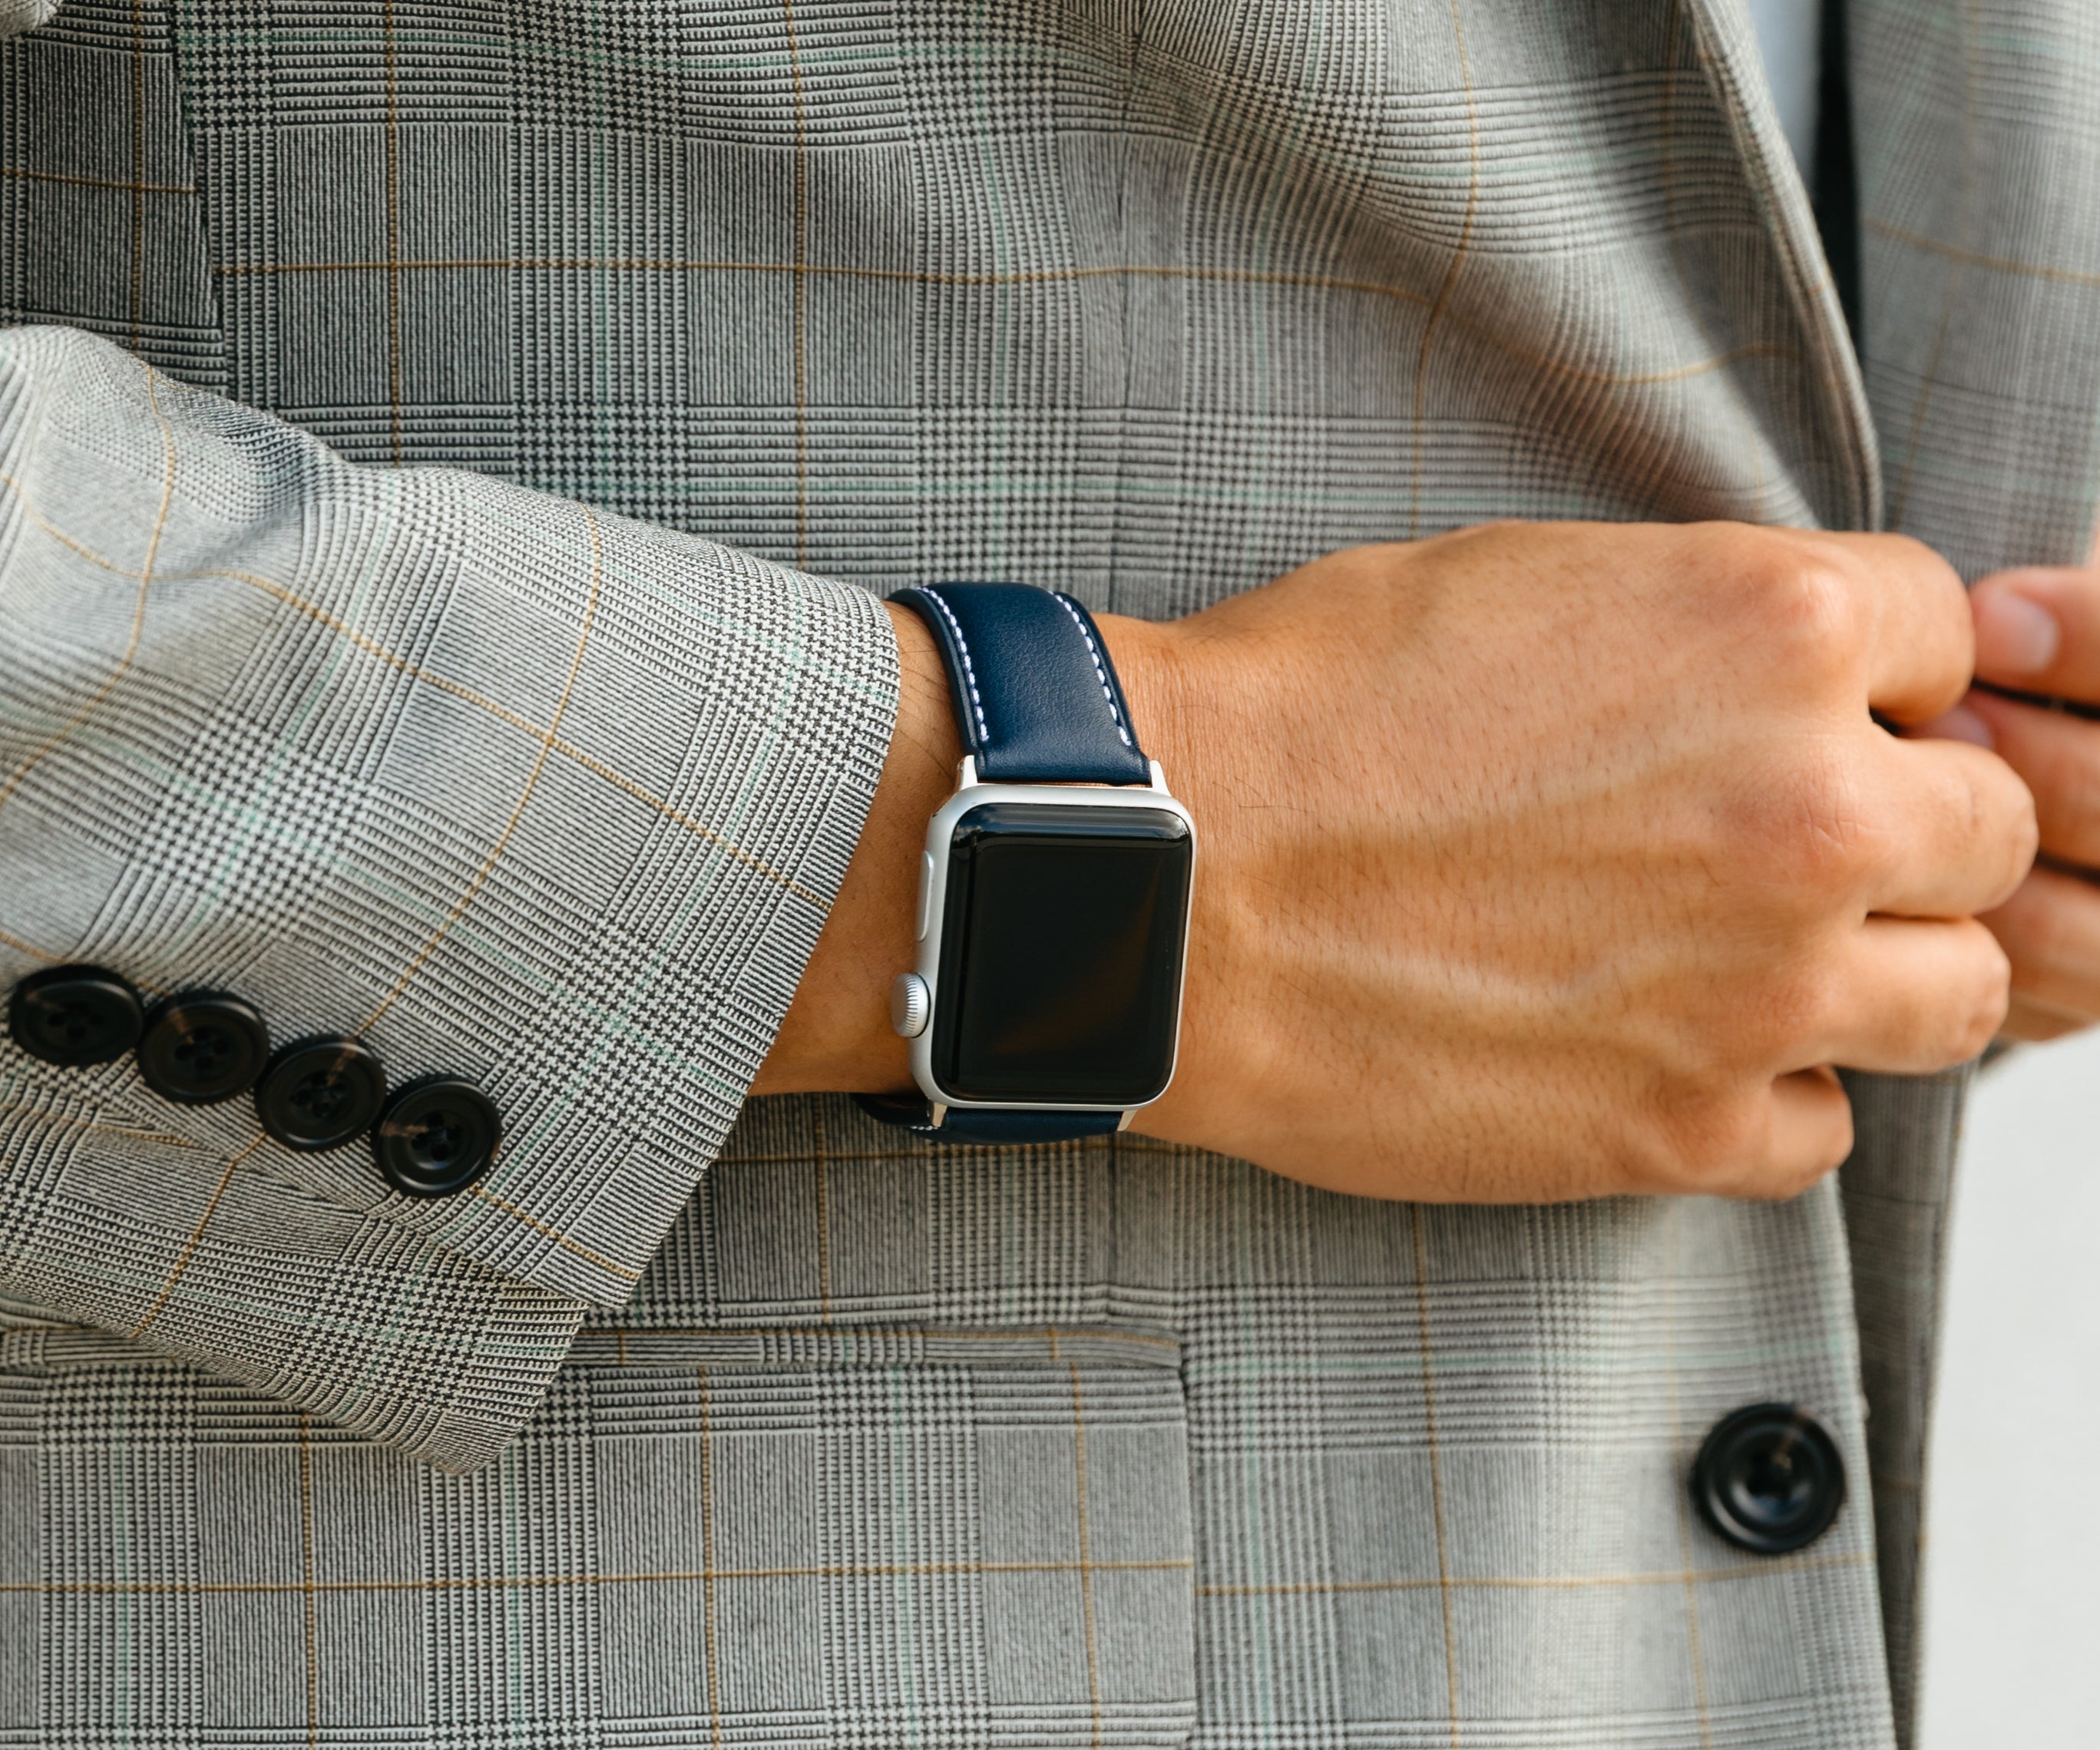 Father’s Day Gifts: Top 5 Leather Tech Goods to Delight Dad